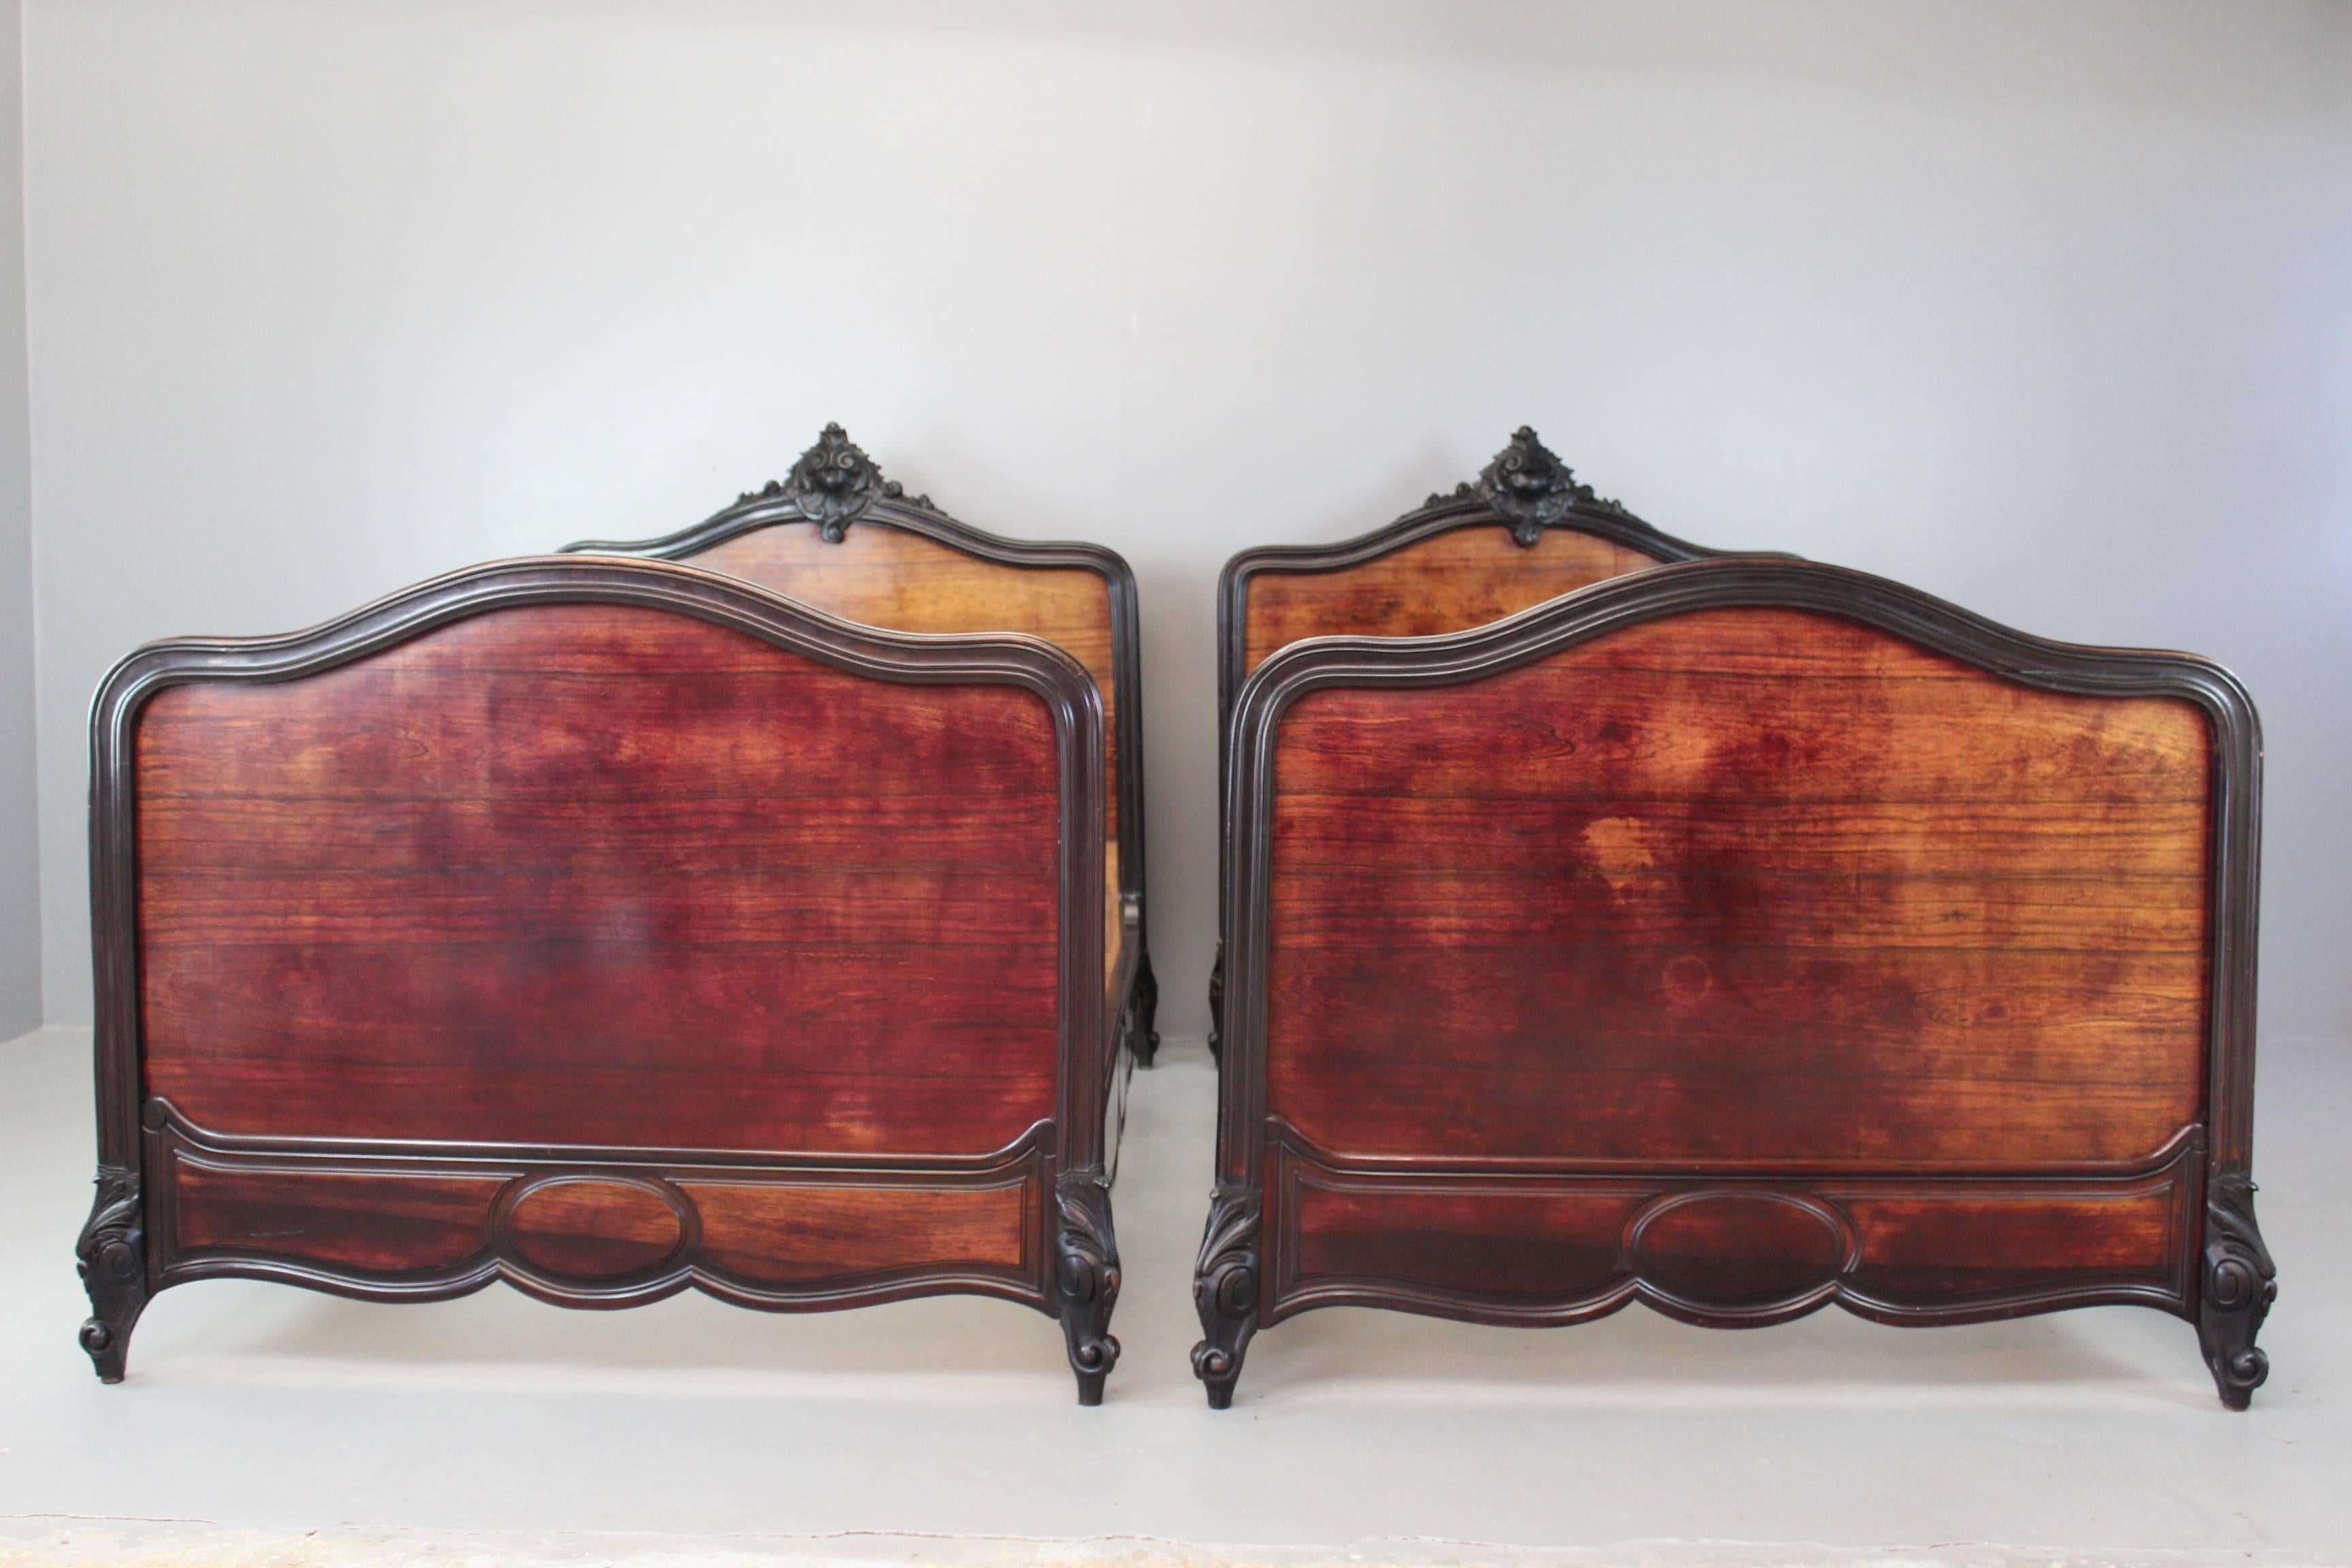 Beautiful pair of late 19th century French Louis XV style single beds. Each bed has an ornate carved crested ebonized frame, with a rosewood veneered head and footboard.

Please click our logo for more items, and to see our full inventory.